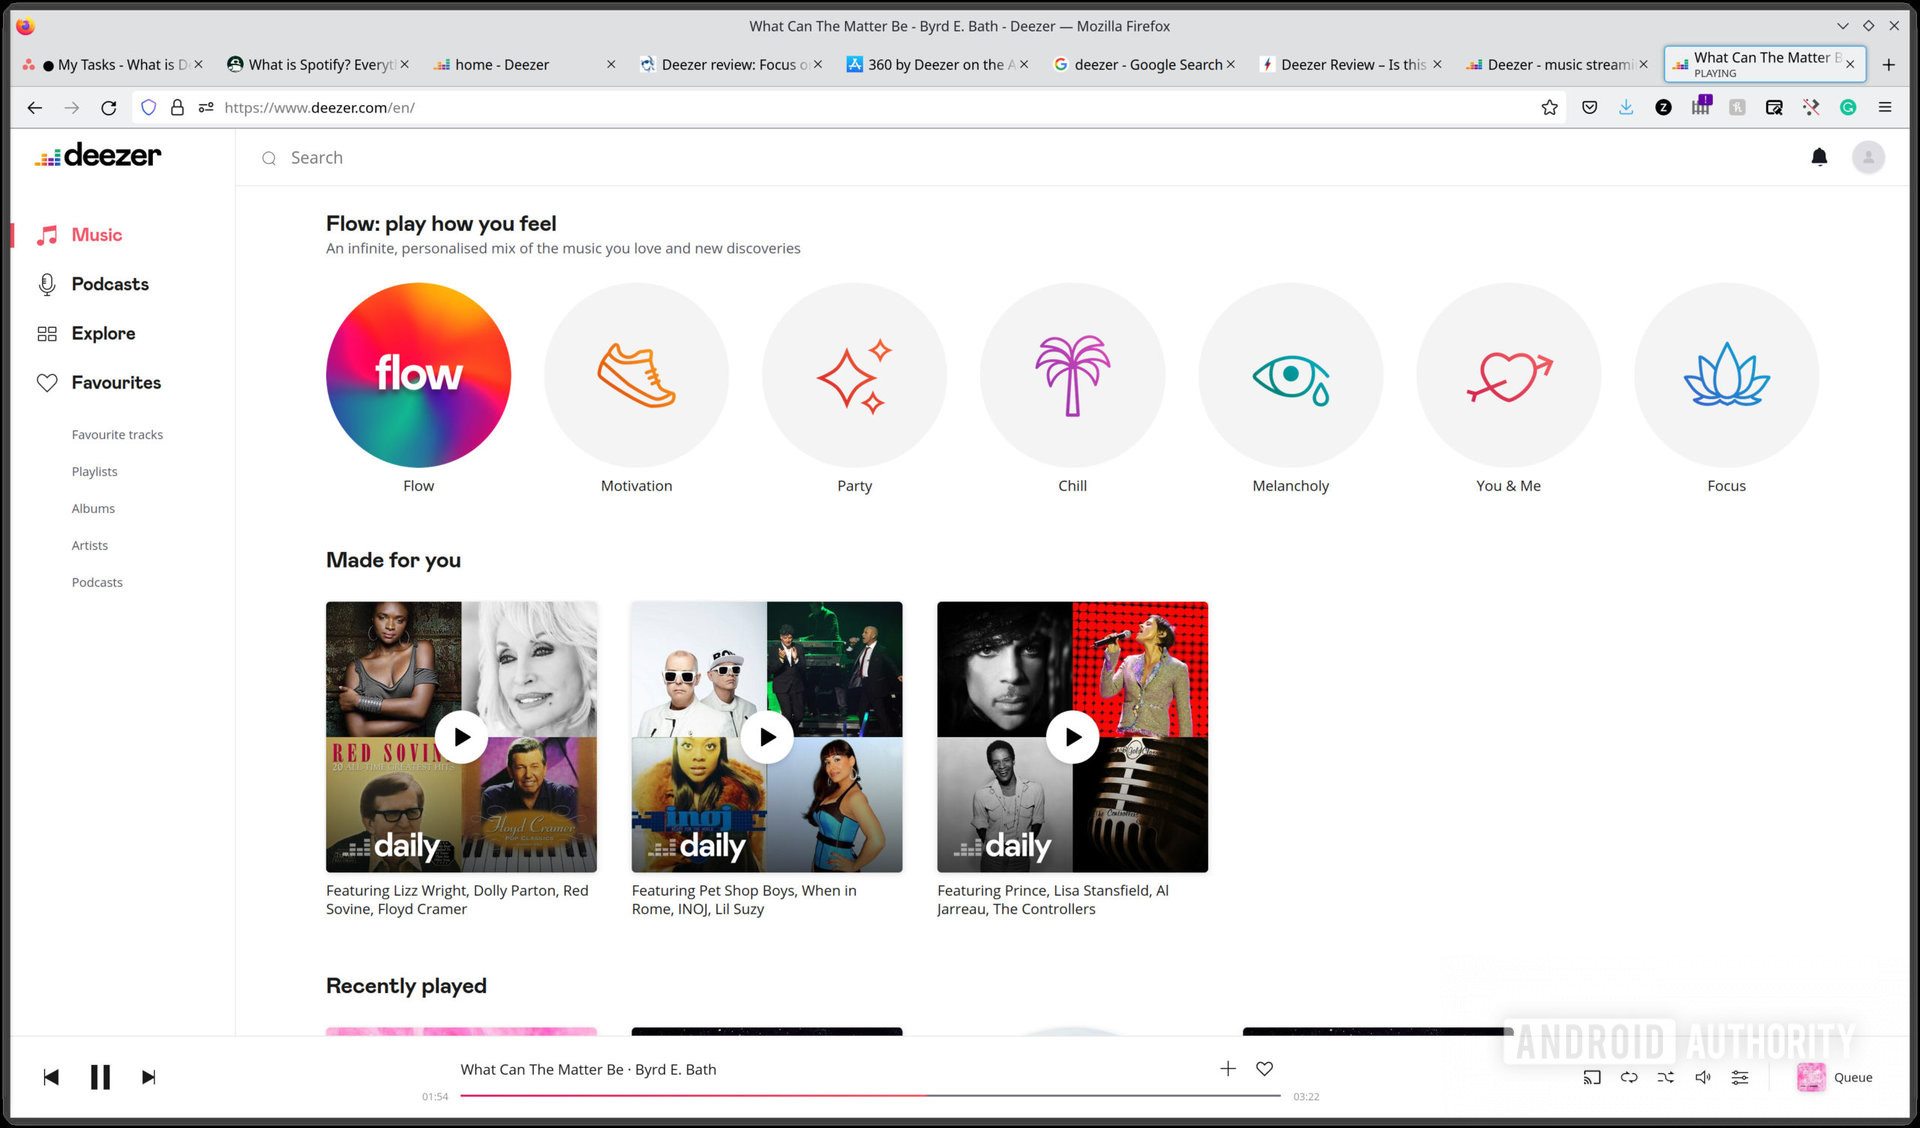 Deezer Home Page "flow"  Clearly visible and different genres and albums available.